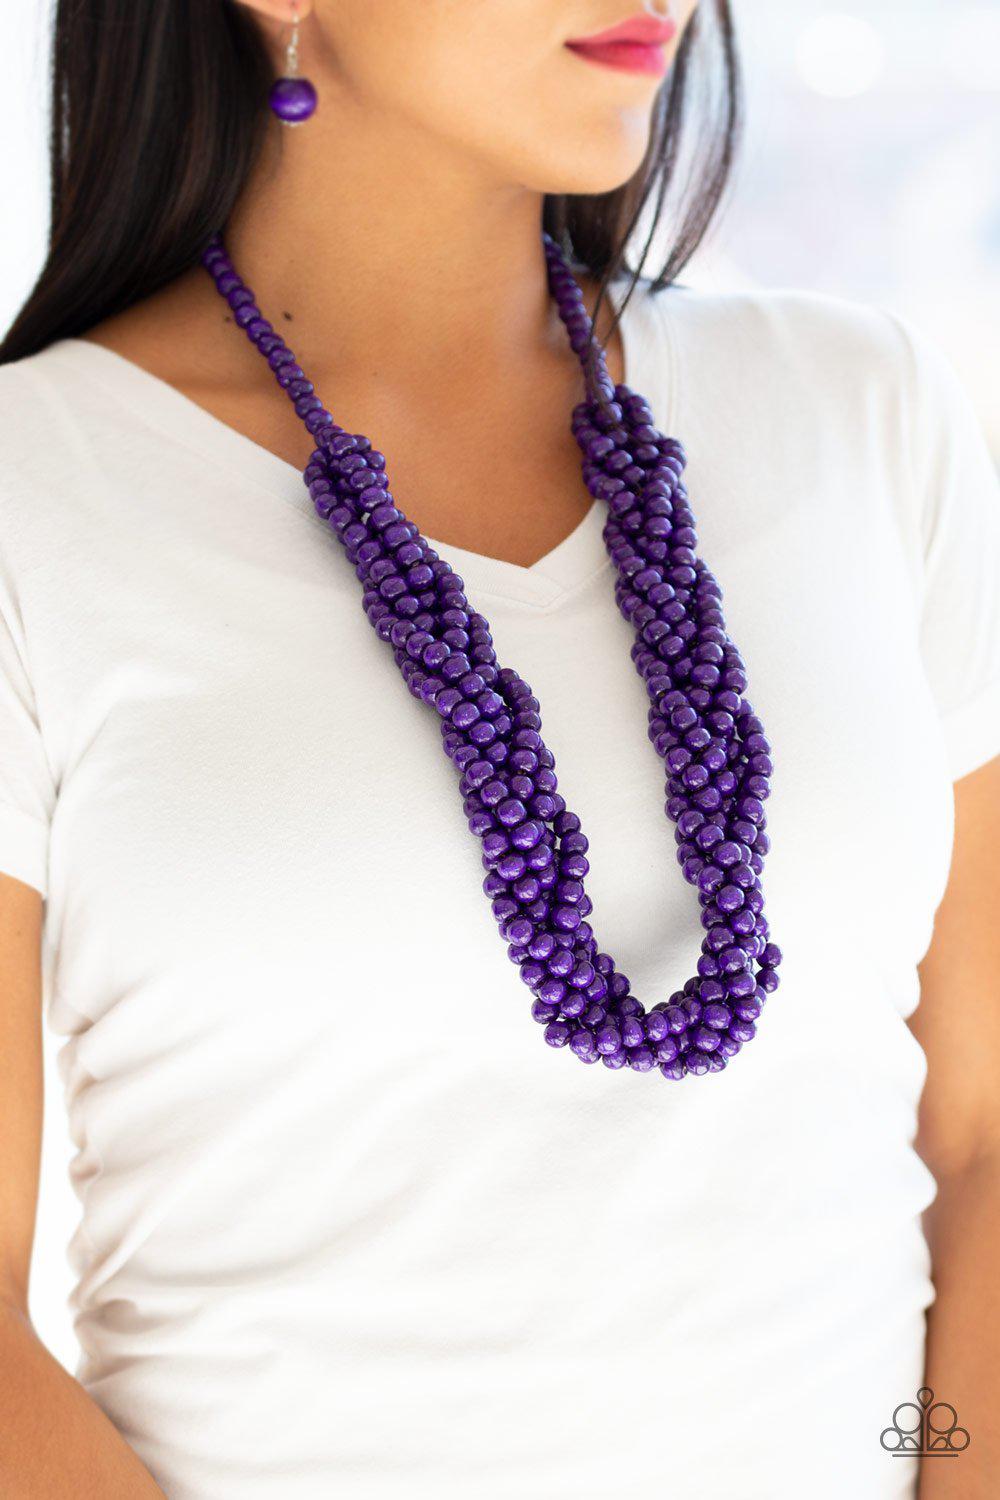 Tahiti Tropic Purple Wood Necklace and matching Earrings - Paparazzi Accessories-CarasShop.com - $5 Jewelry by Cara Jewels